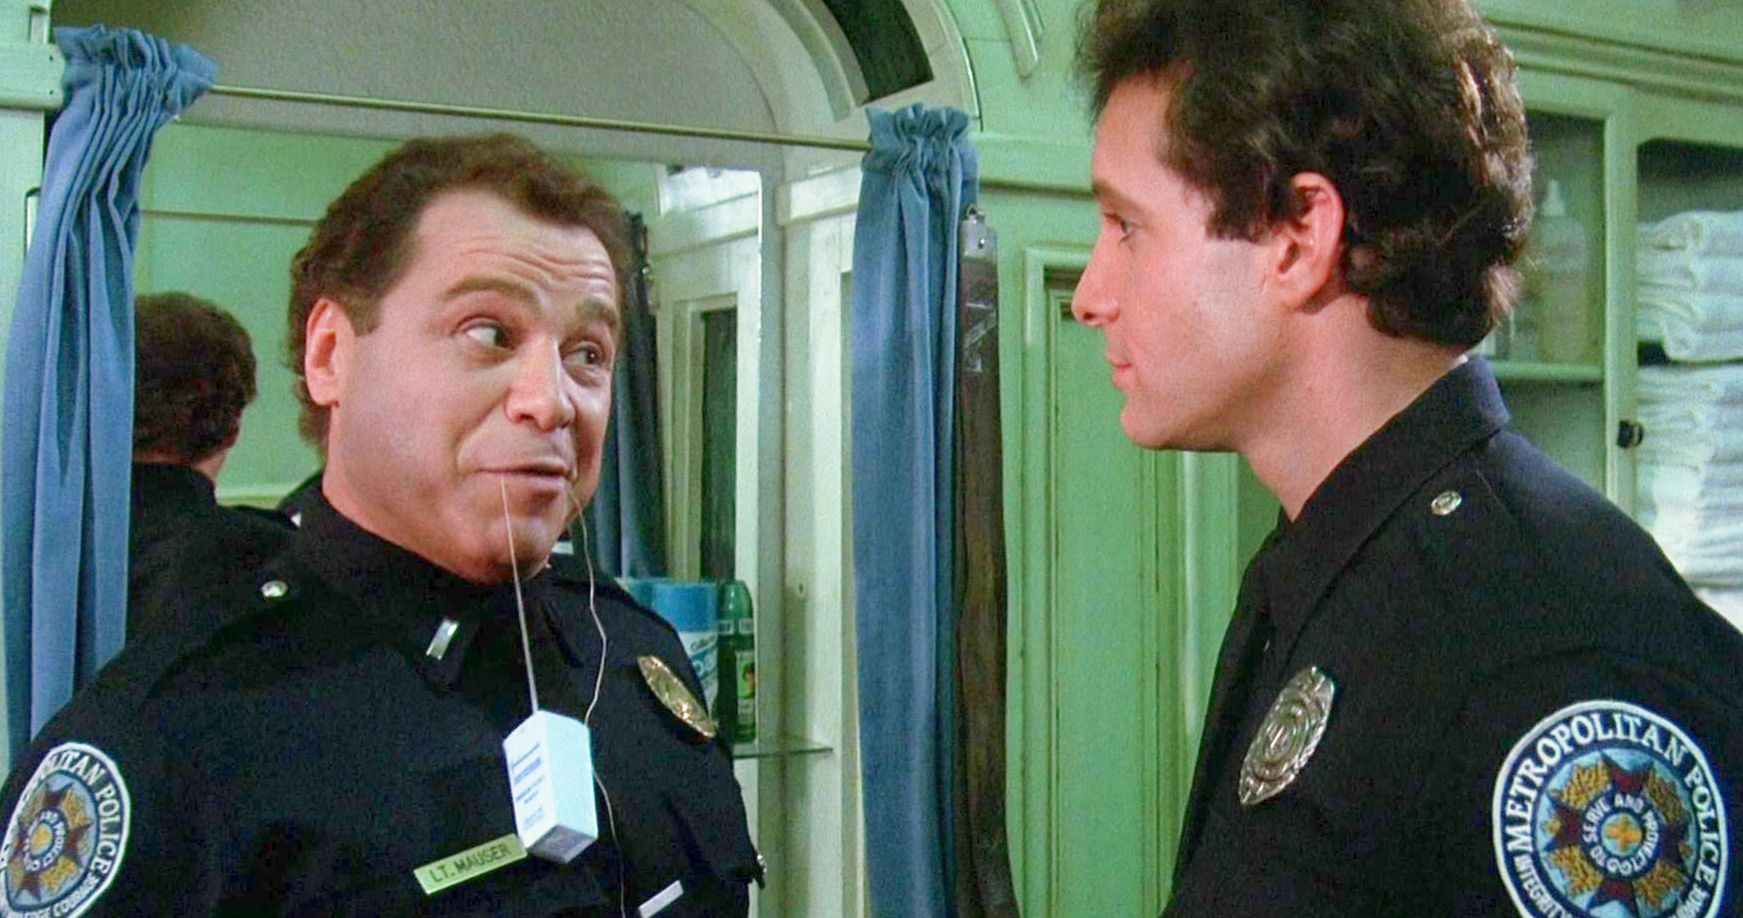 Art Metrano Dies, Comedian and Police Academy Star Was 84